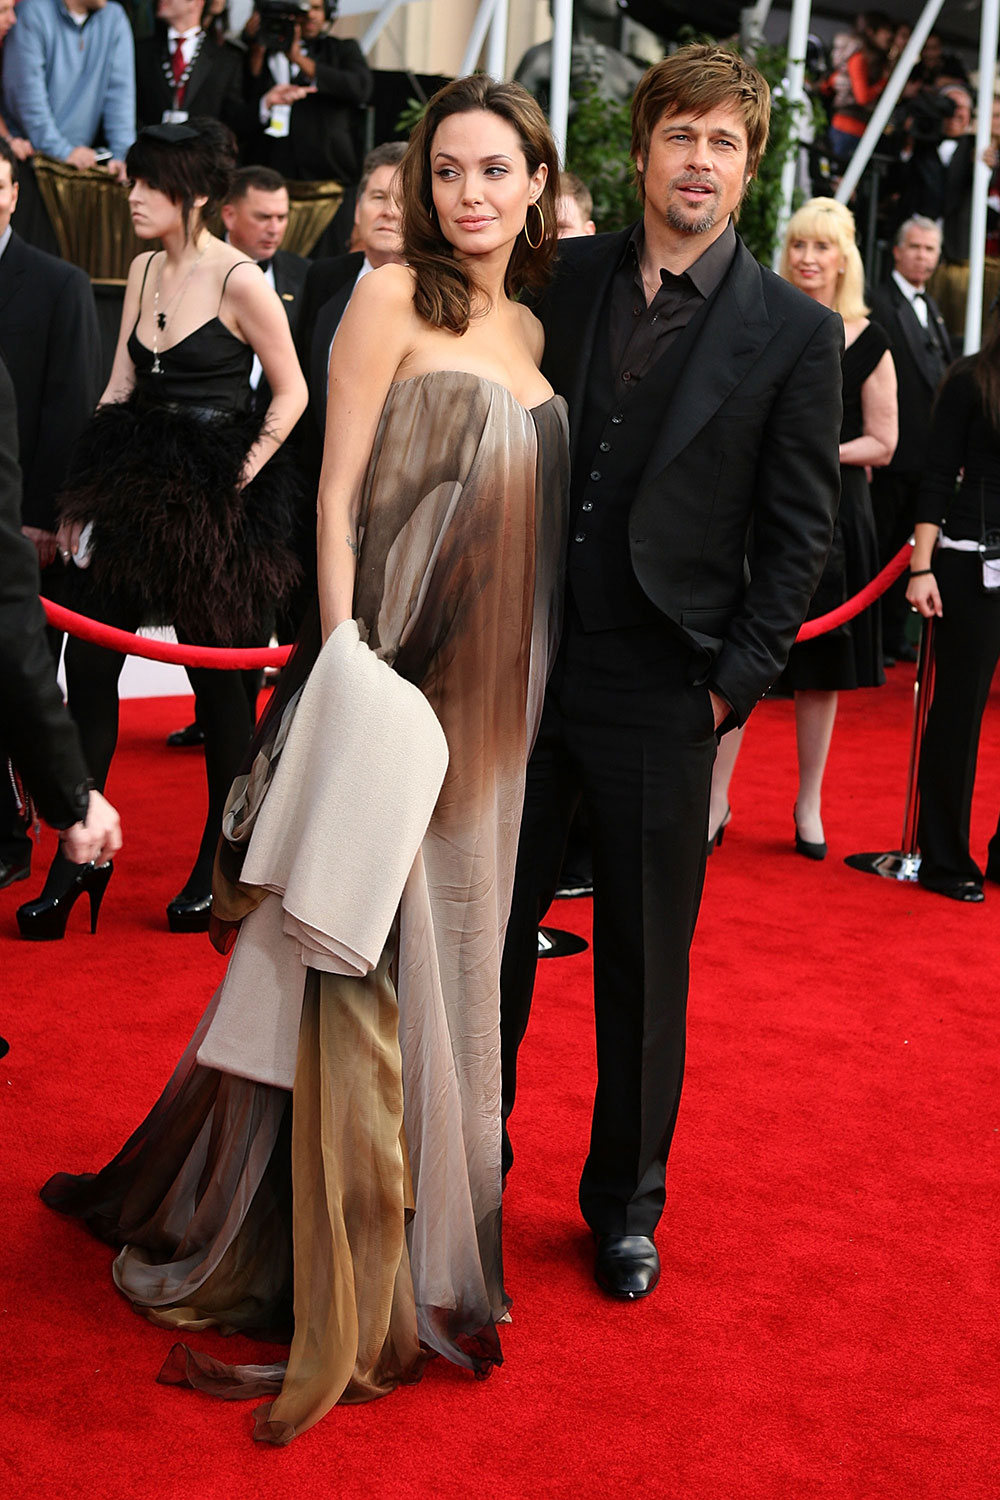 Brad Pitt and Angelina Jolie at the 14th Annual Screen Actors Guild Awards in 2008